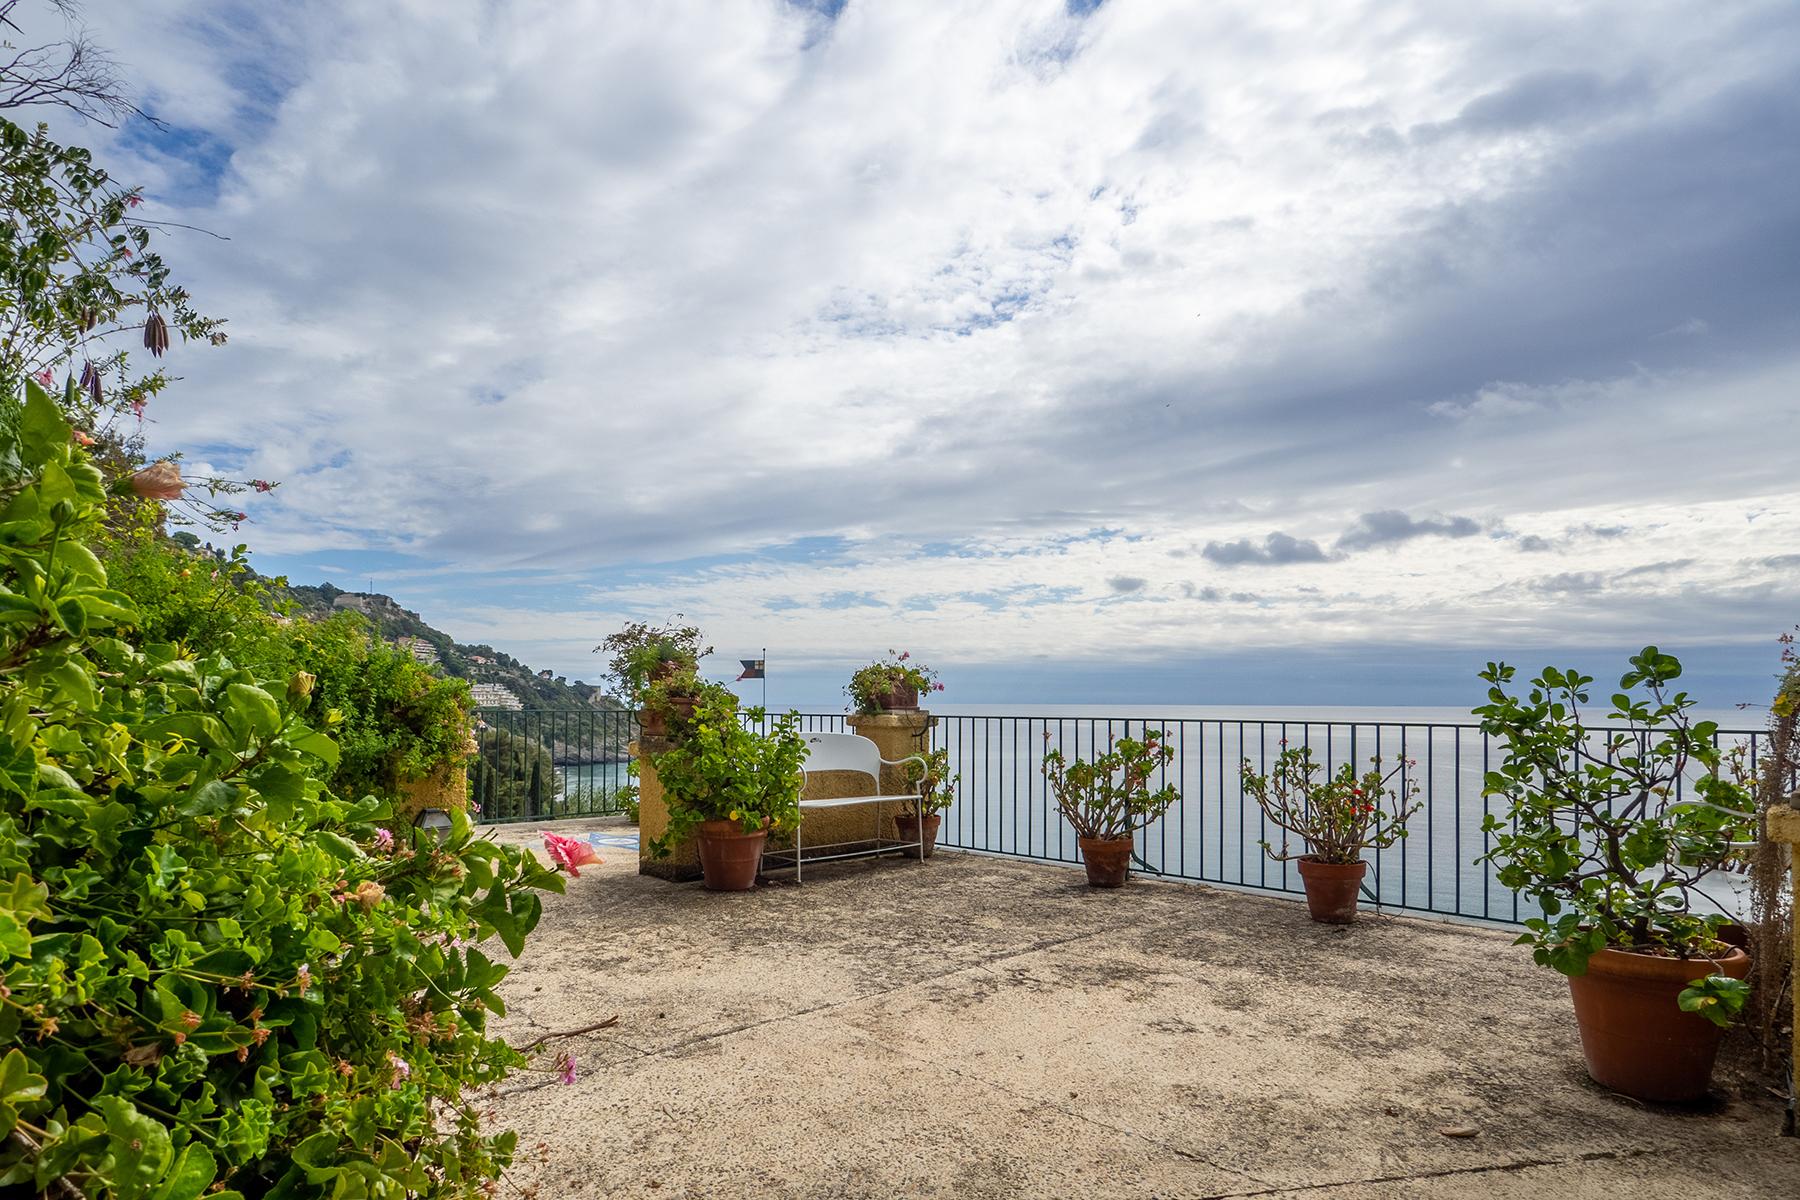 Semidetached historical villa with private access to the sea - 20